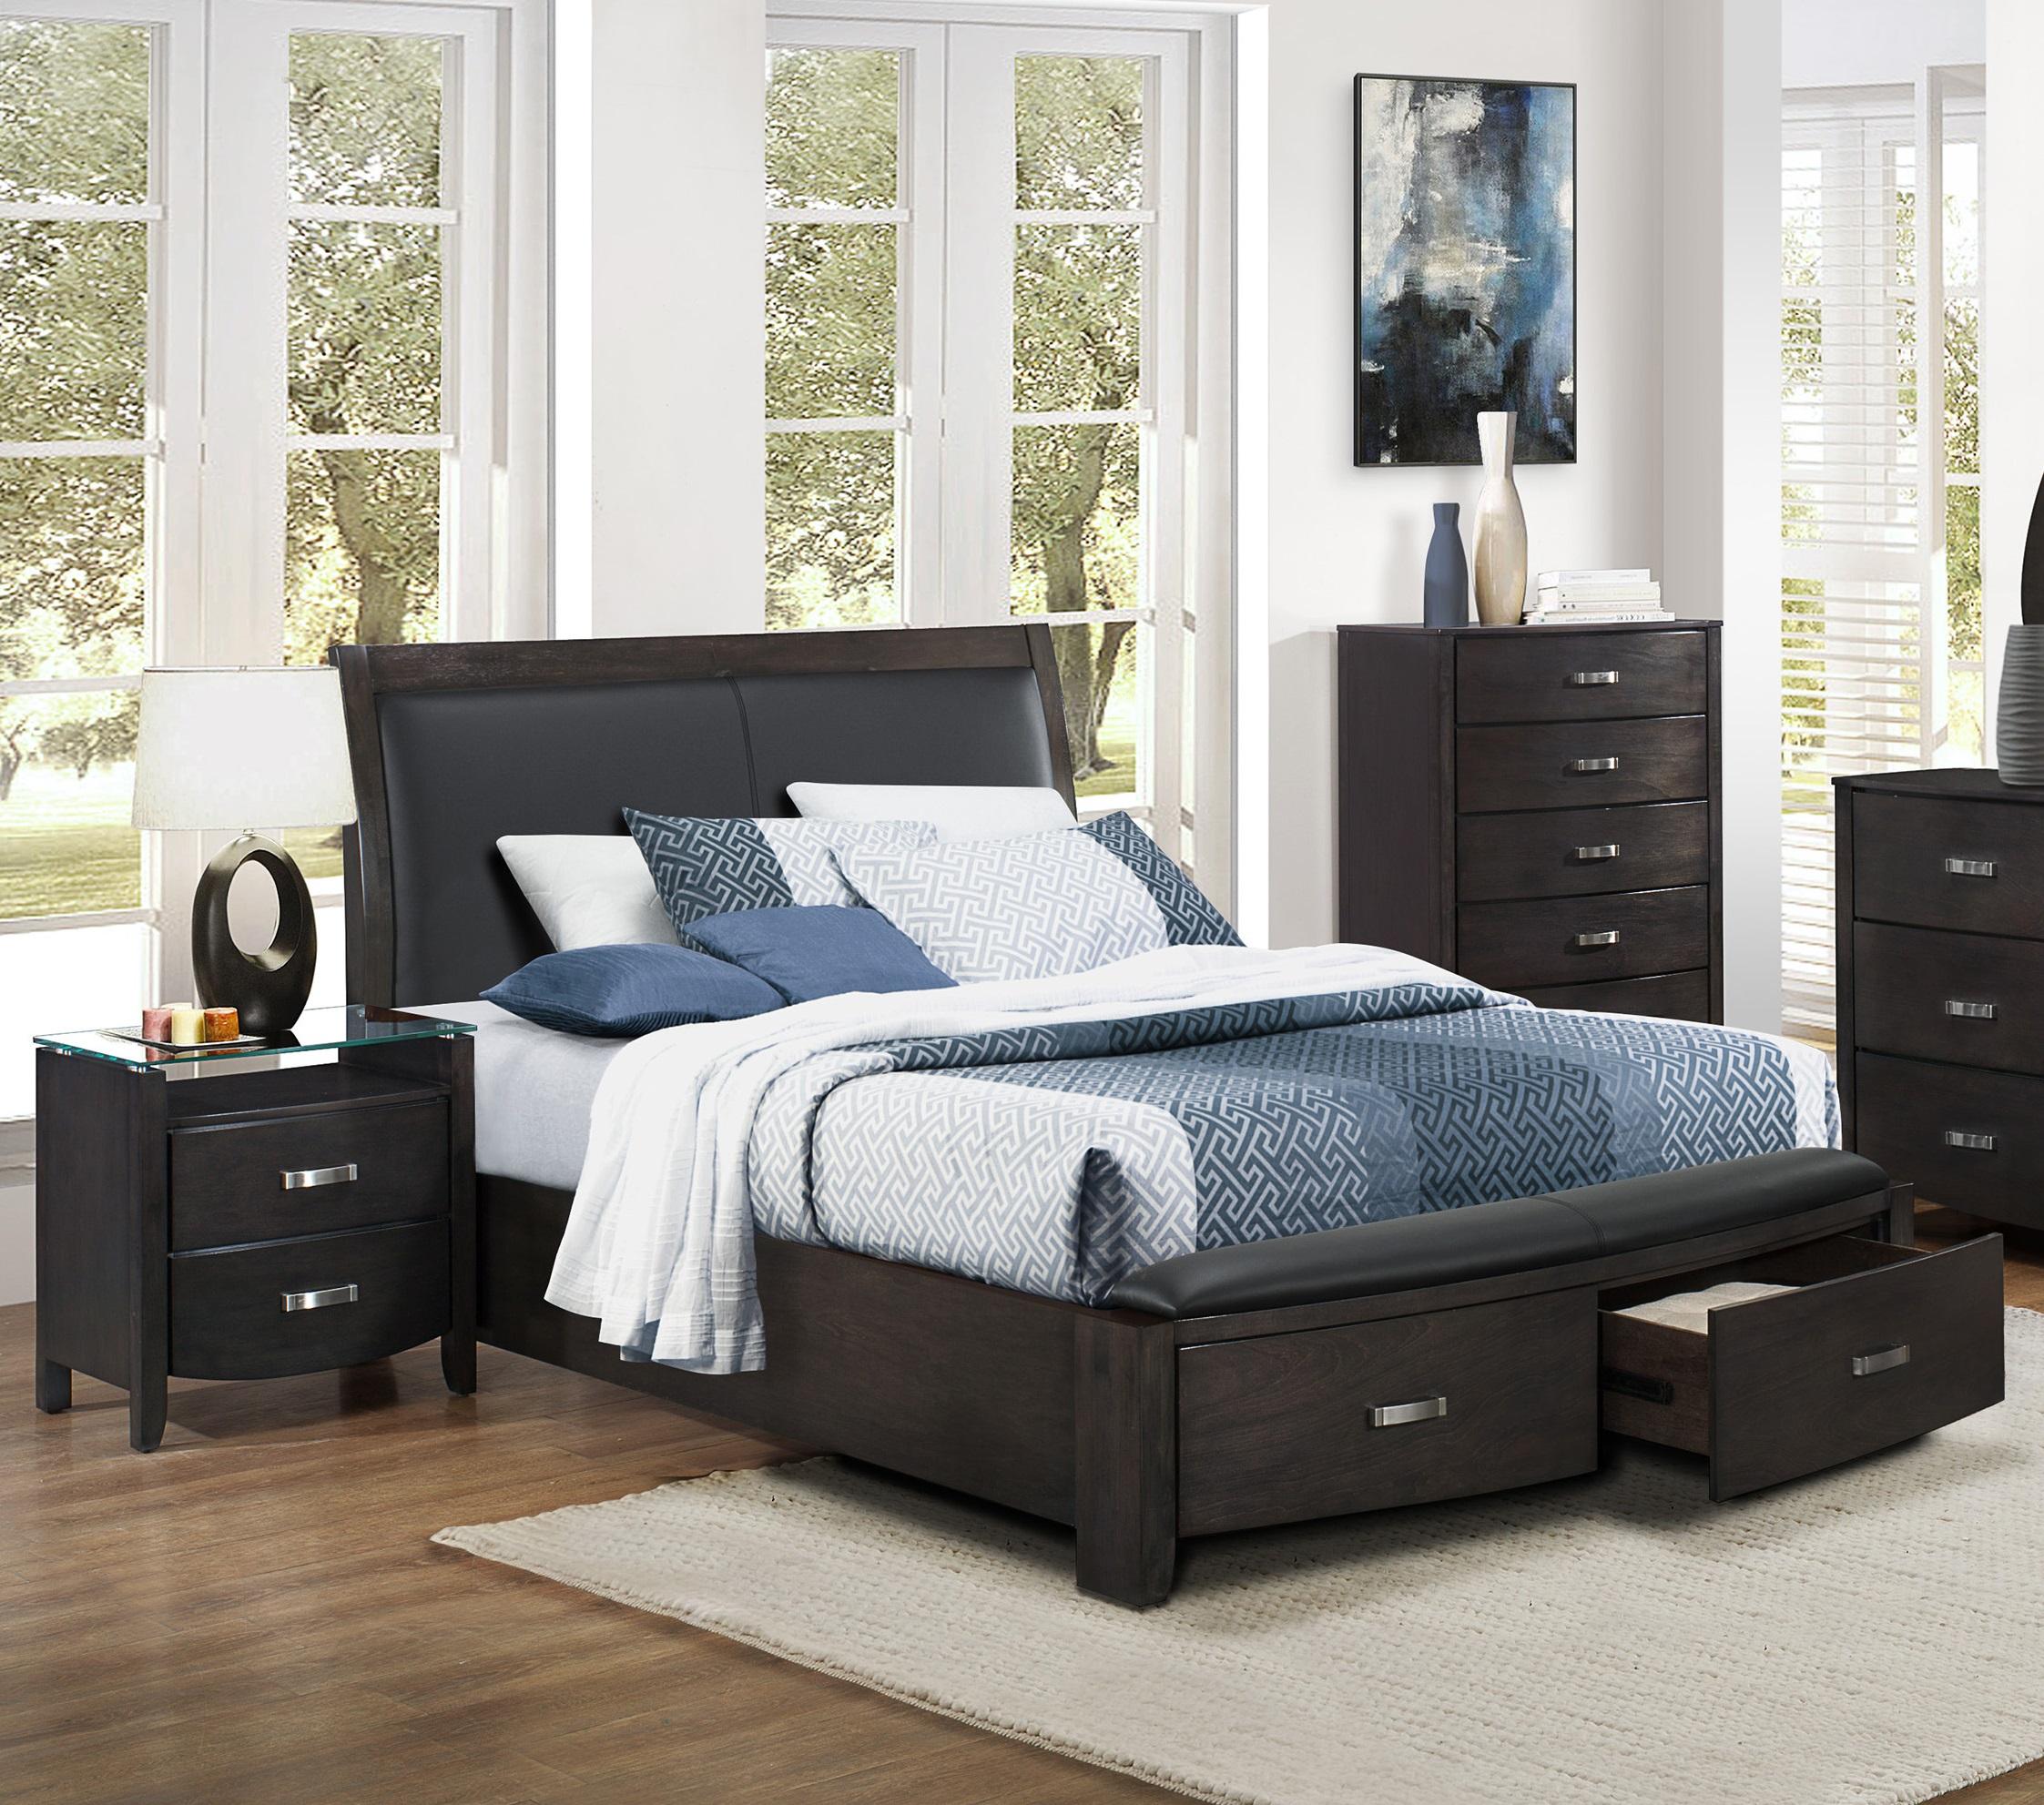 Contemporary Bedroom Set 1737KNGY-1CK-3PC Lyric 1737KNGY-1CK-3PC in Gray Faux Leather